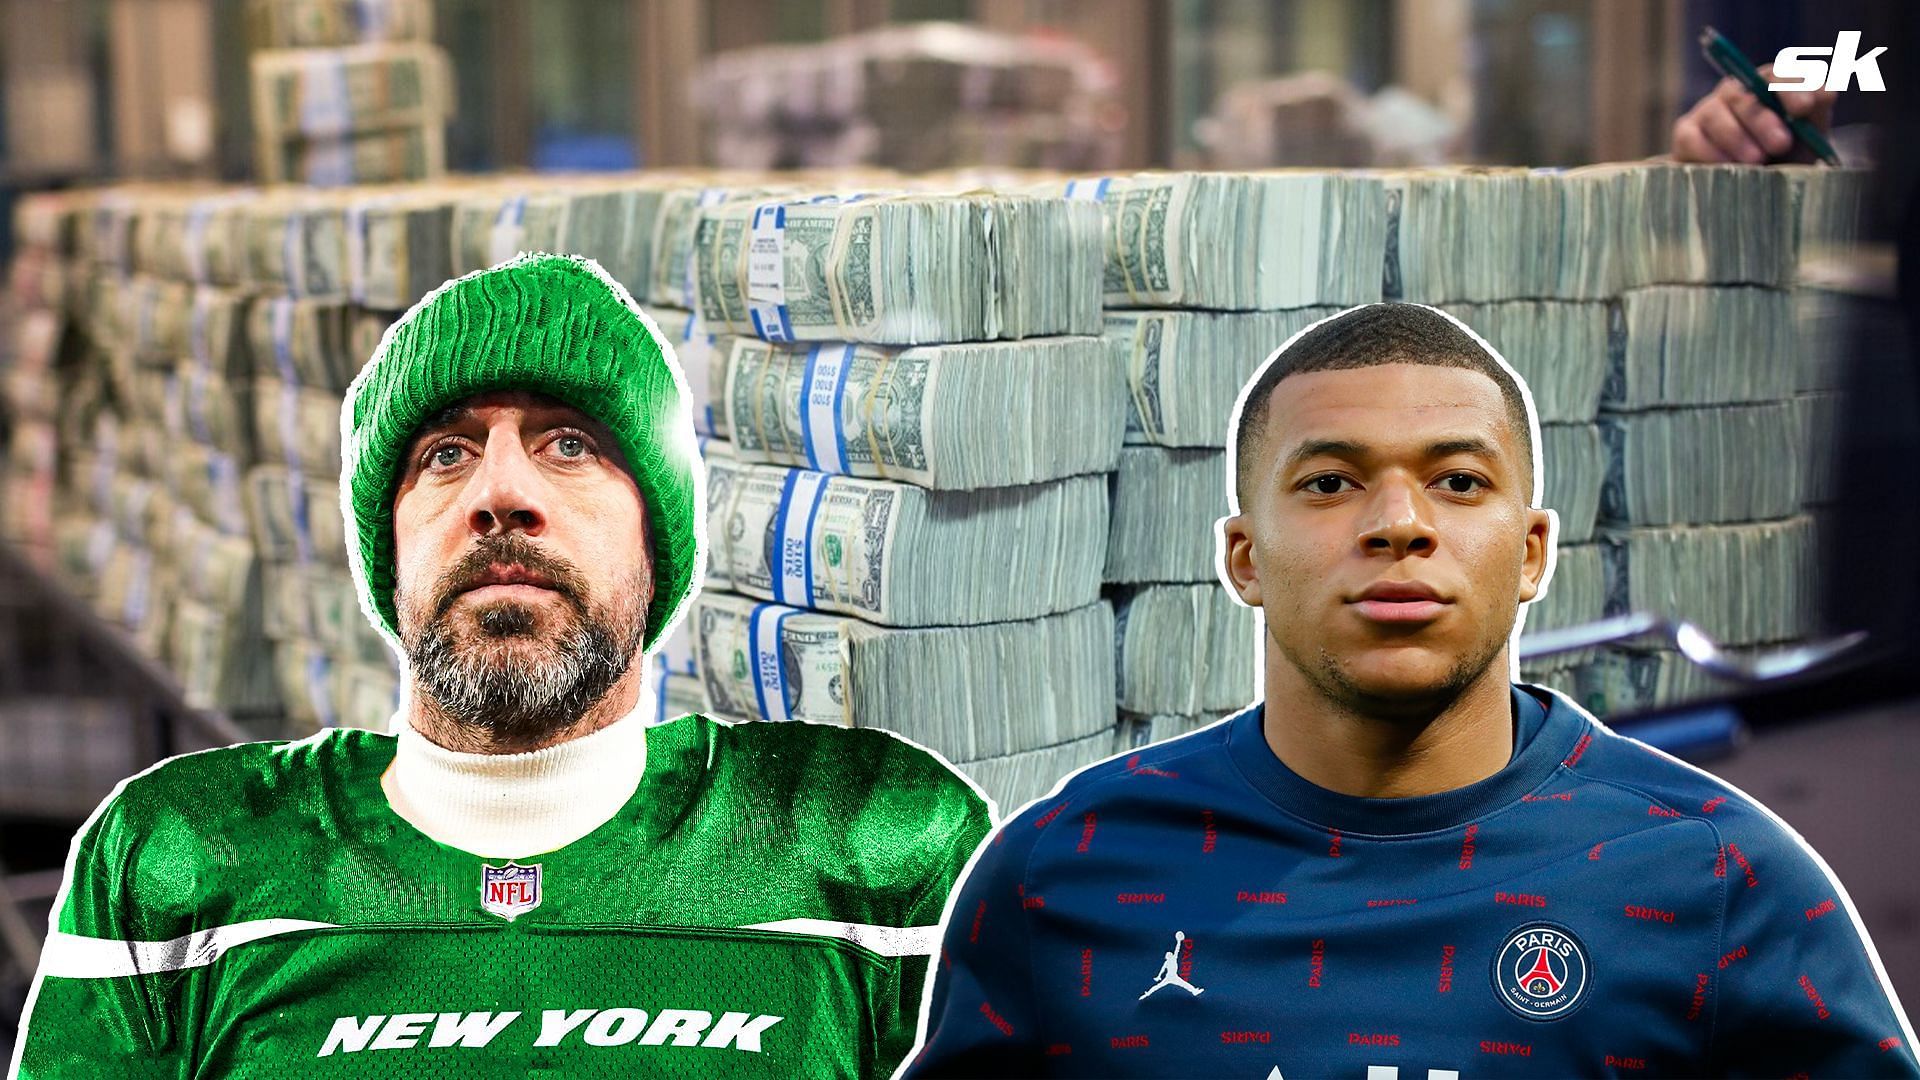 Craig Carton draws similarities between Aaron Rodgers and Kylian Mbappe following Jets QB&rsquo;s $100M contract restructure